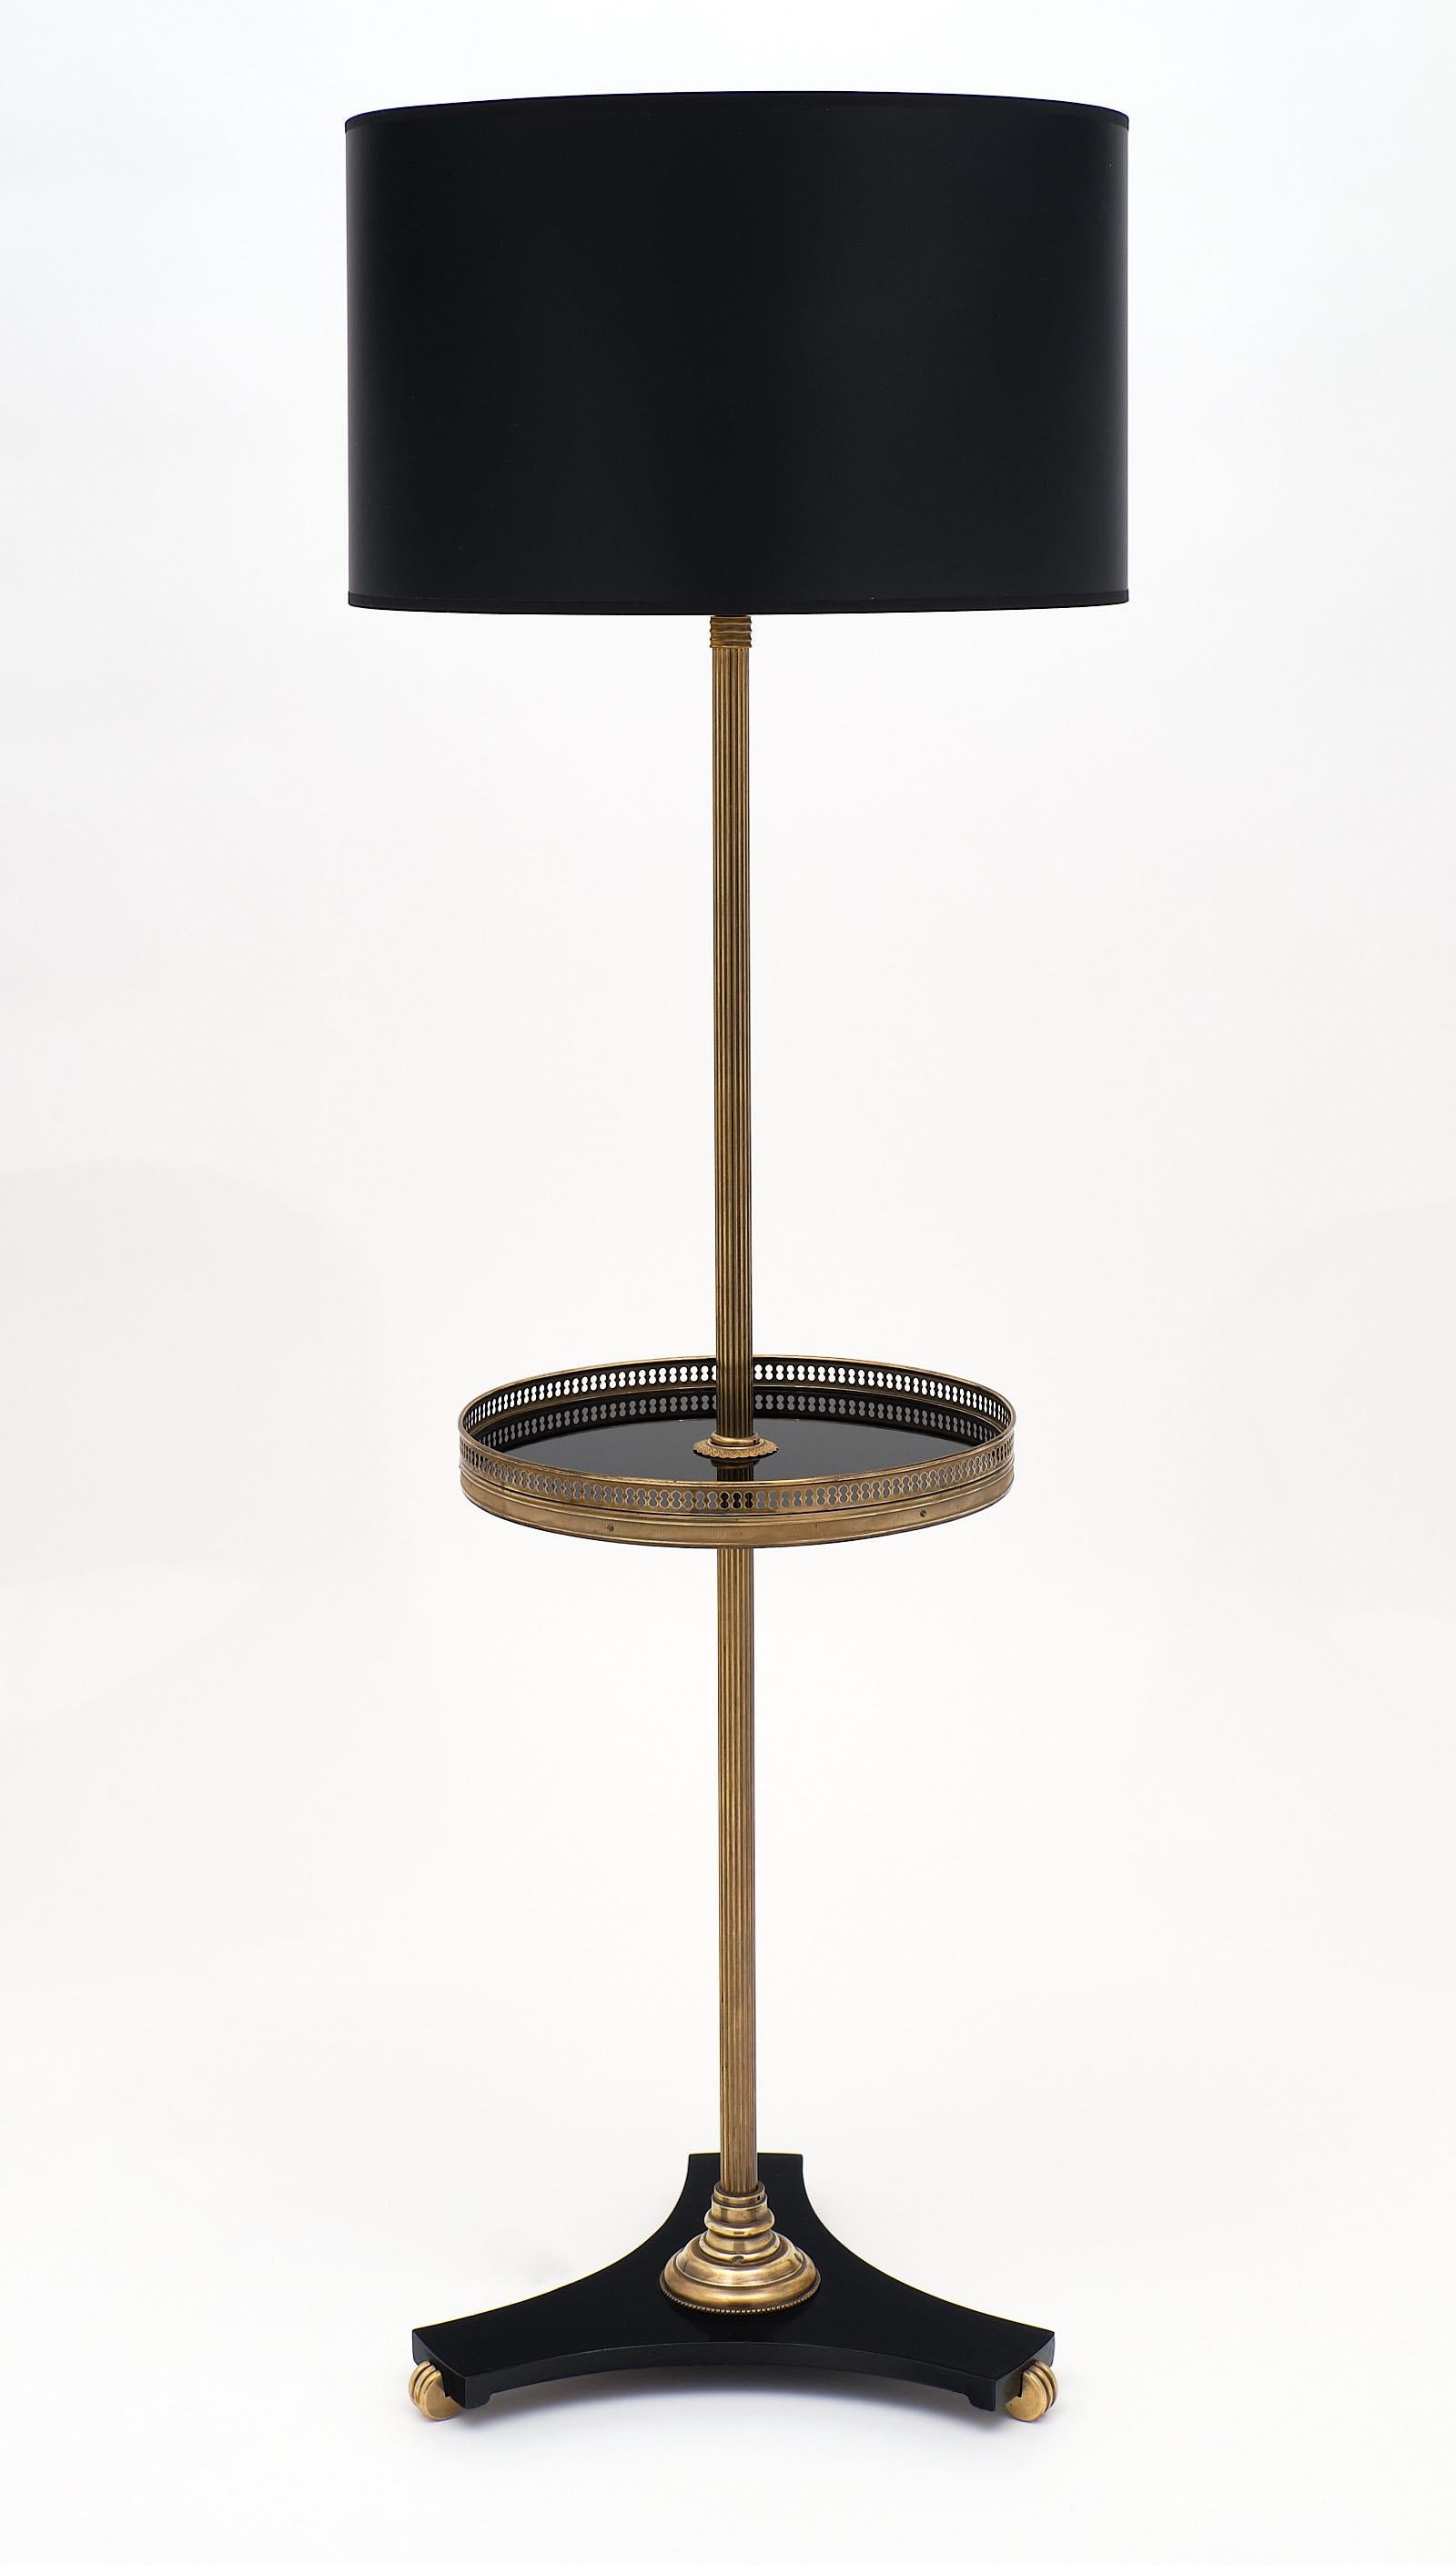 French Neoclassical brass and iron floor lamp from the Art Deco period. This piece has a cobalt black glass tray with a brass gallery and a tripod cast iron base. We love the stability of this fixture. It has been newly wired to fit US standards.